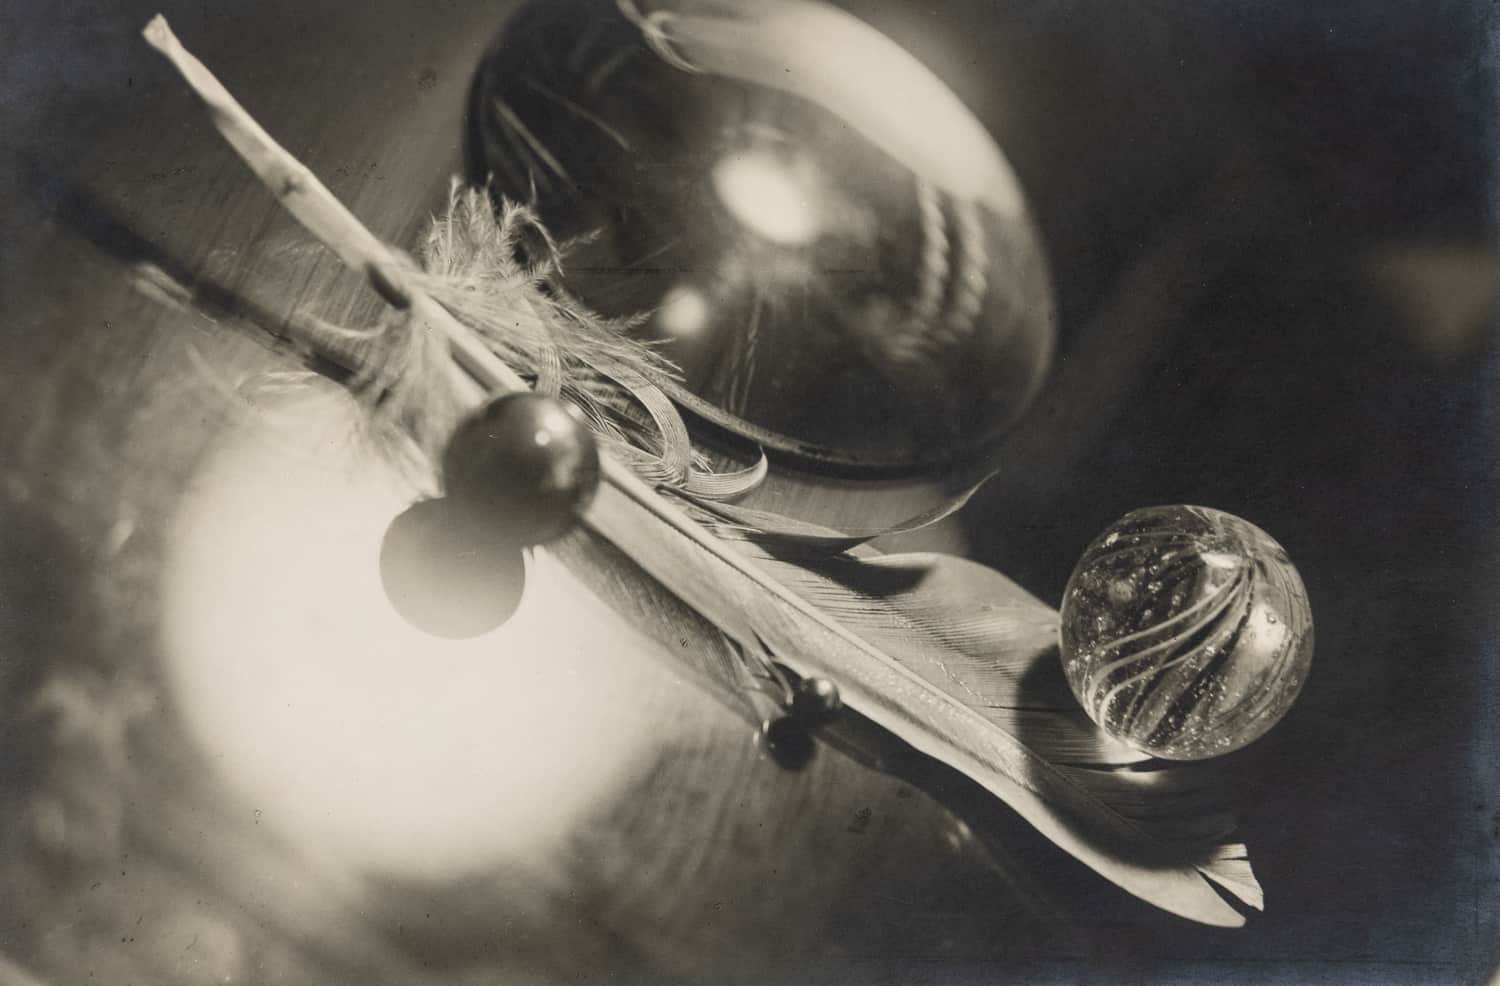 Circle of Emile Langui, Surreal Still Life of Feather, Marbles and Crystal, c. 1928. Modern Objects, Huxley-Parlour Gallery, 3–5 Swallow St, London, W1B 4DE.